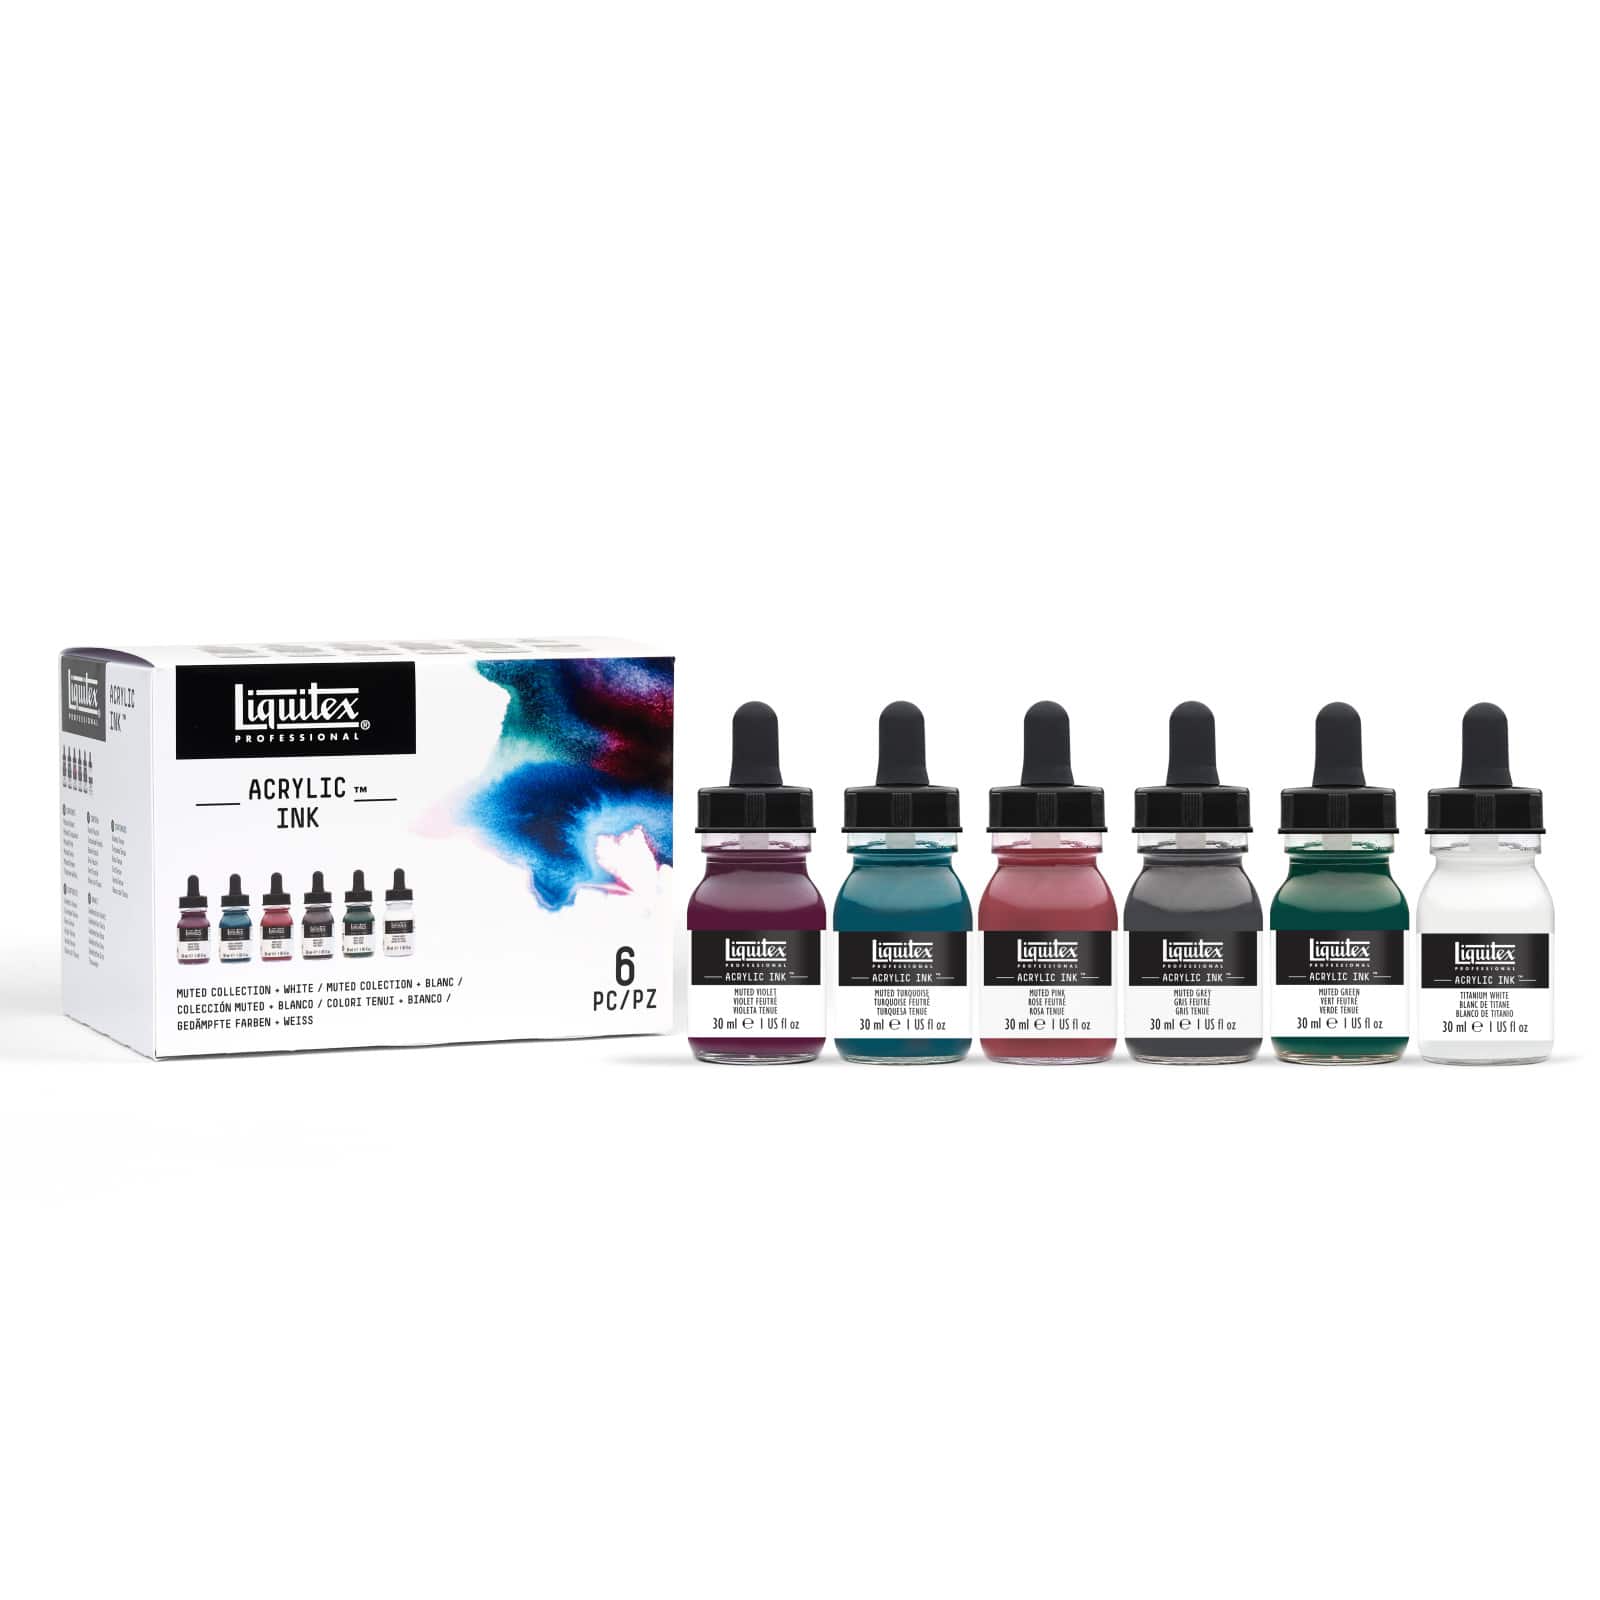 Liquitex&#xAE; Professional Acrylic Ink&#x2122; Muted Collection + White